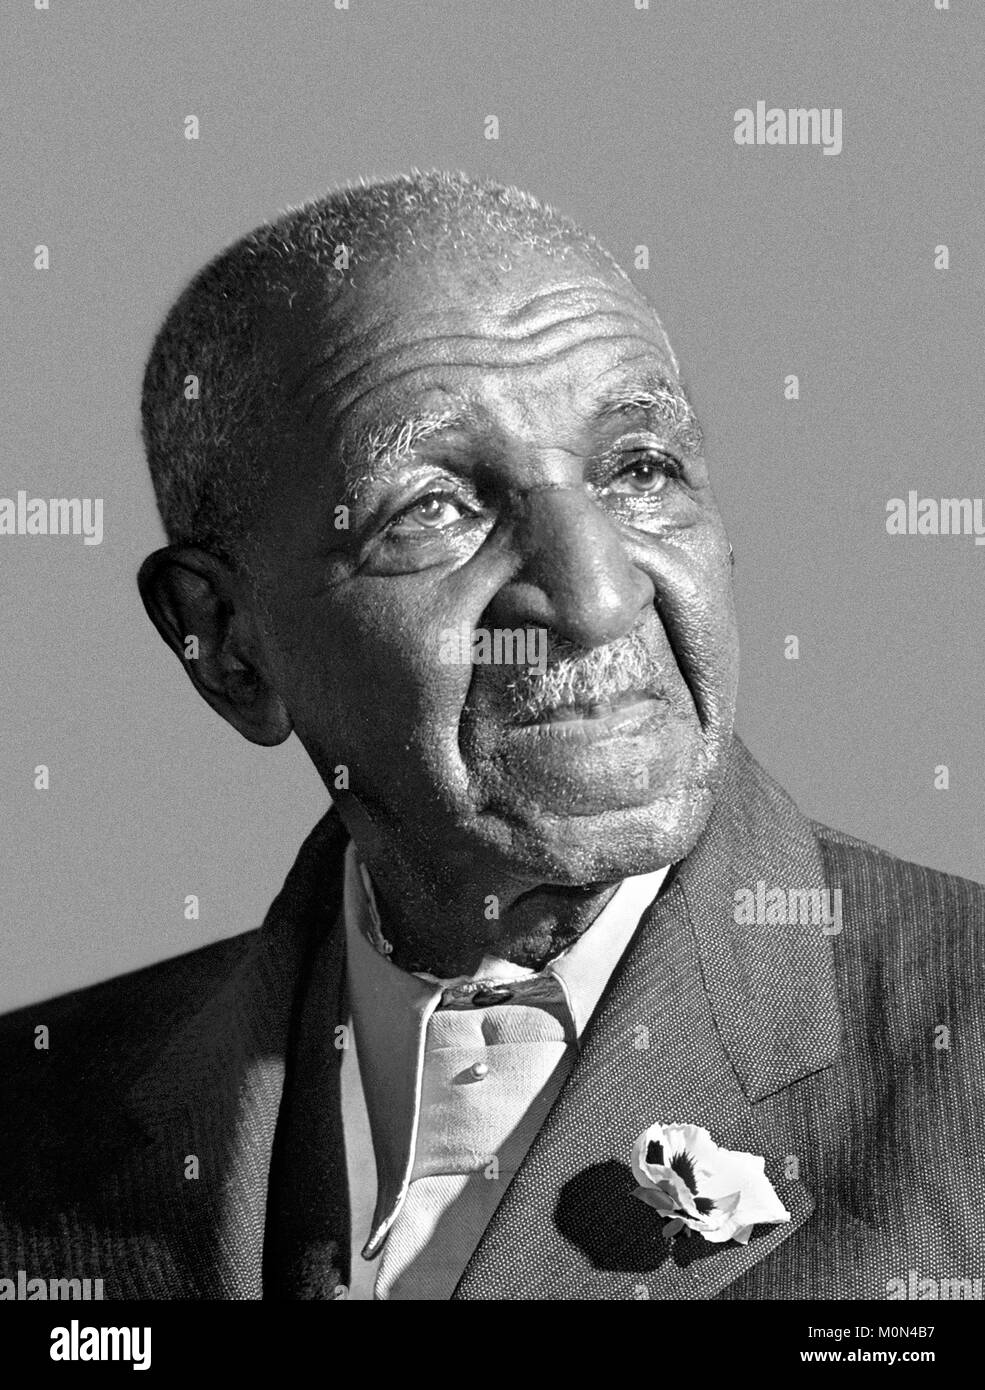 George Washington Carver (1860s-1943). Portrait of the American botanist and inventor by Arthur Rothstein, 1942. Stock Photo